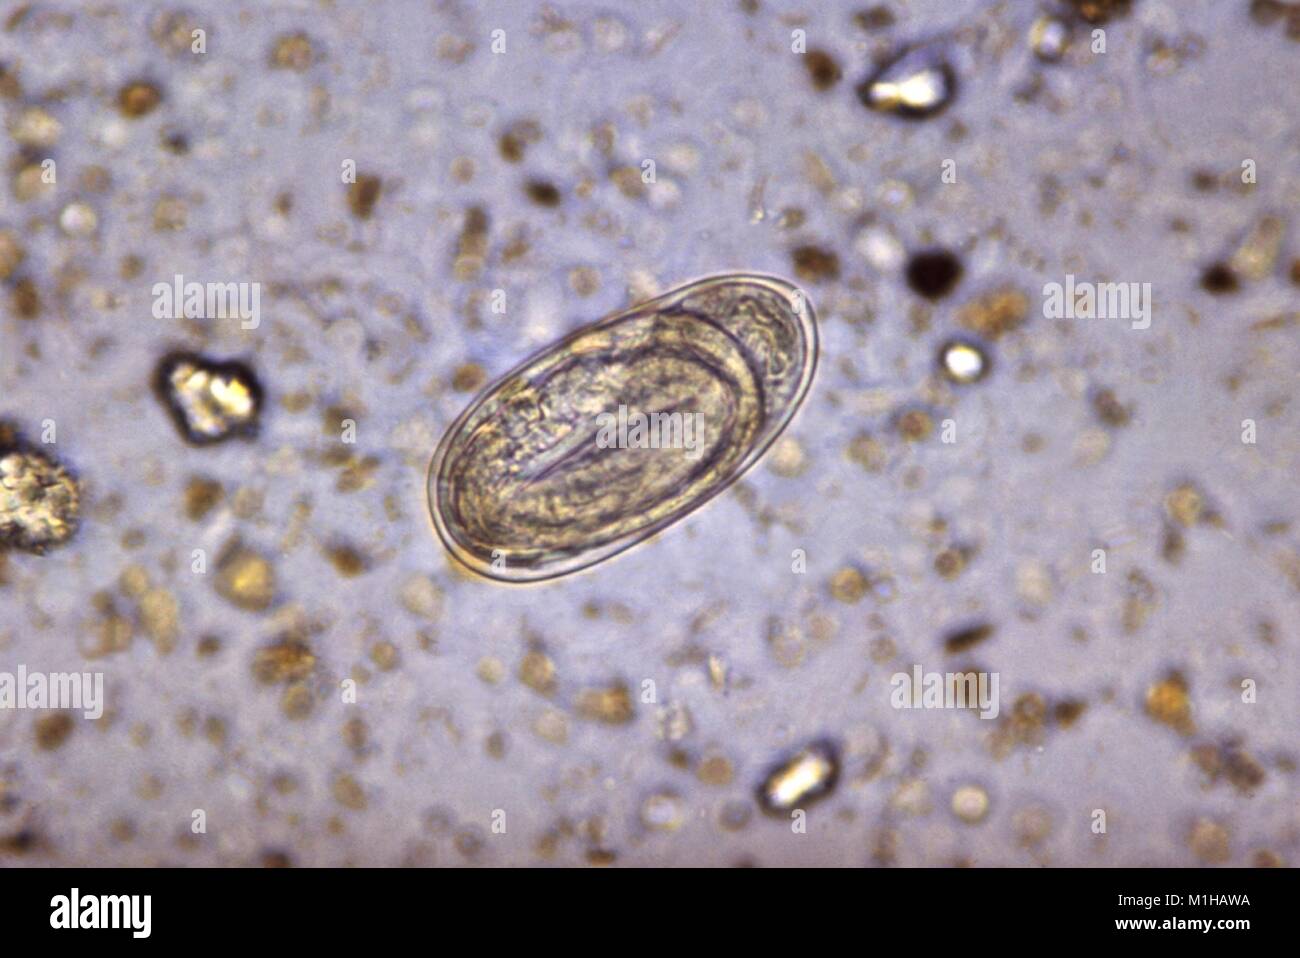 Photomicrograph of an embryonated hookworm egg  